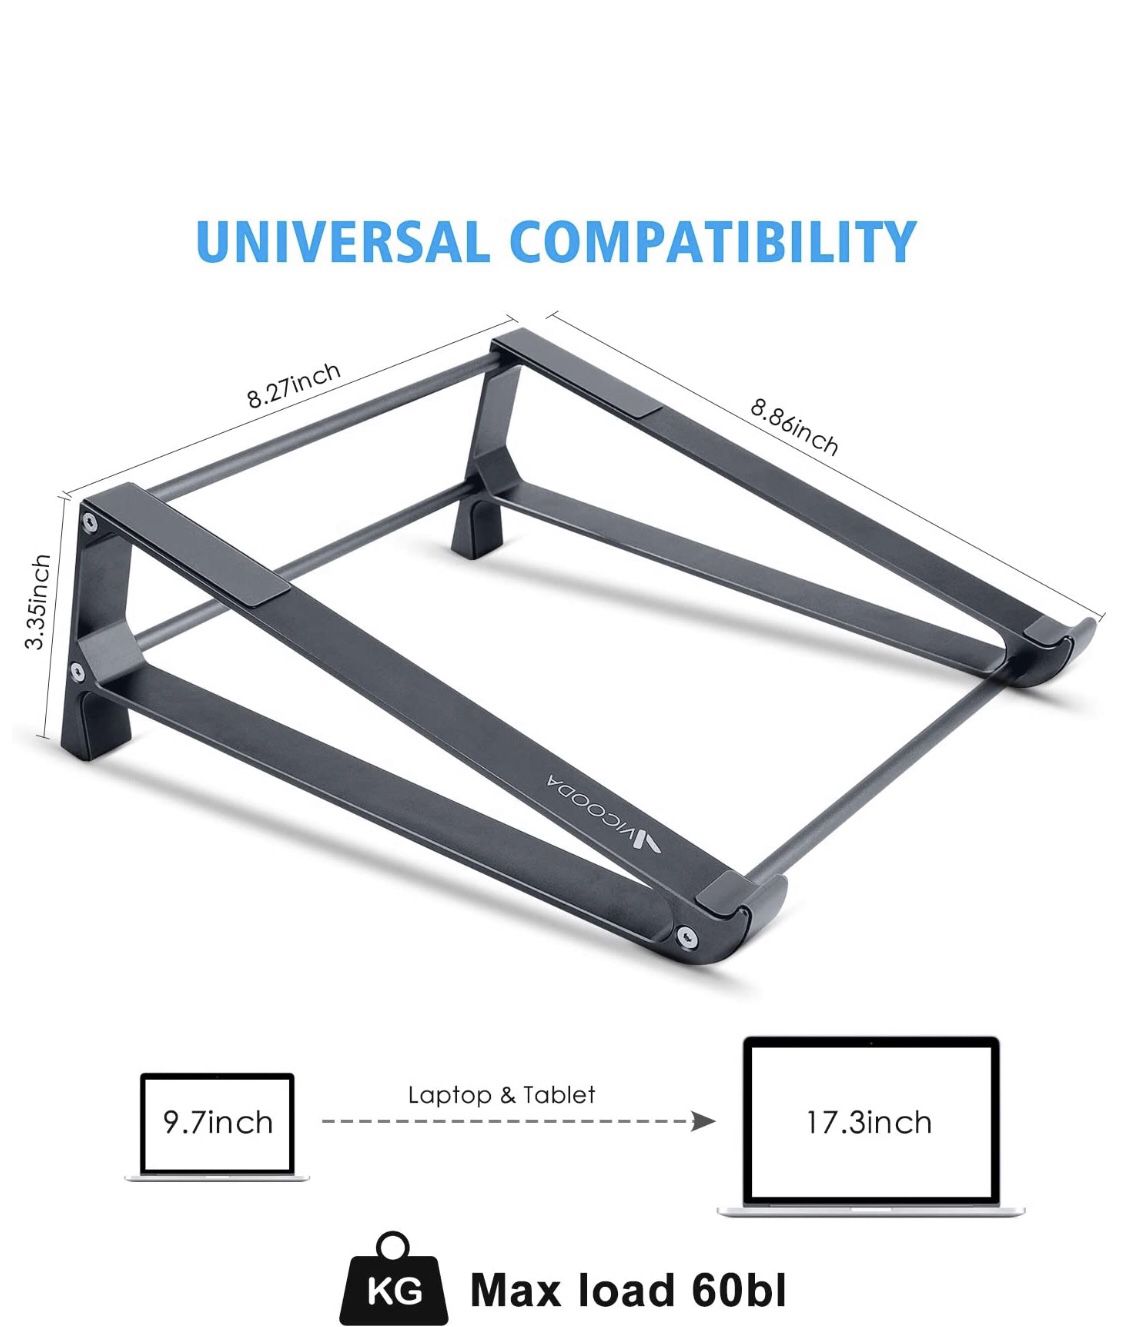 Laptop Stand, 2-1 Laptop Desk Stand, Vertical Laptop Stand for Space-Saving, Ergonomic Laptop Stand